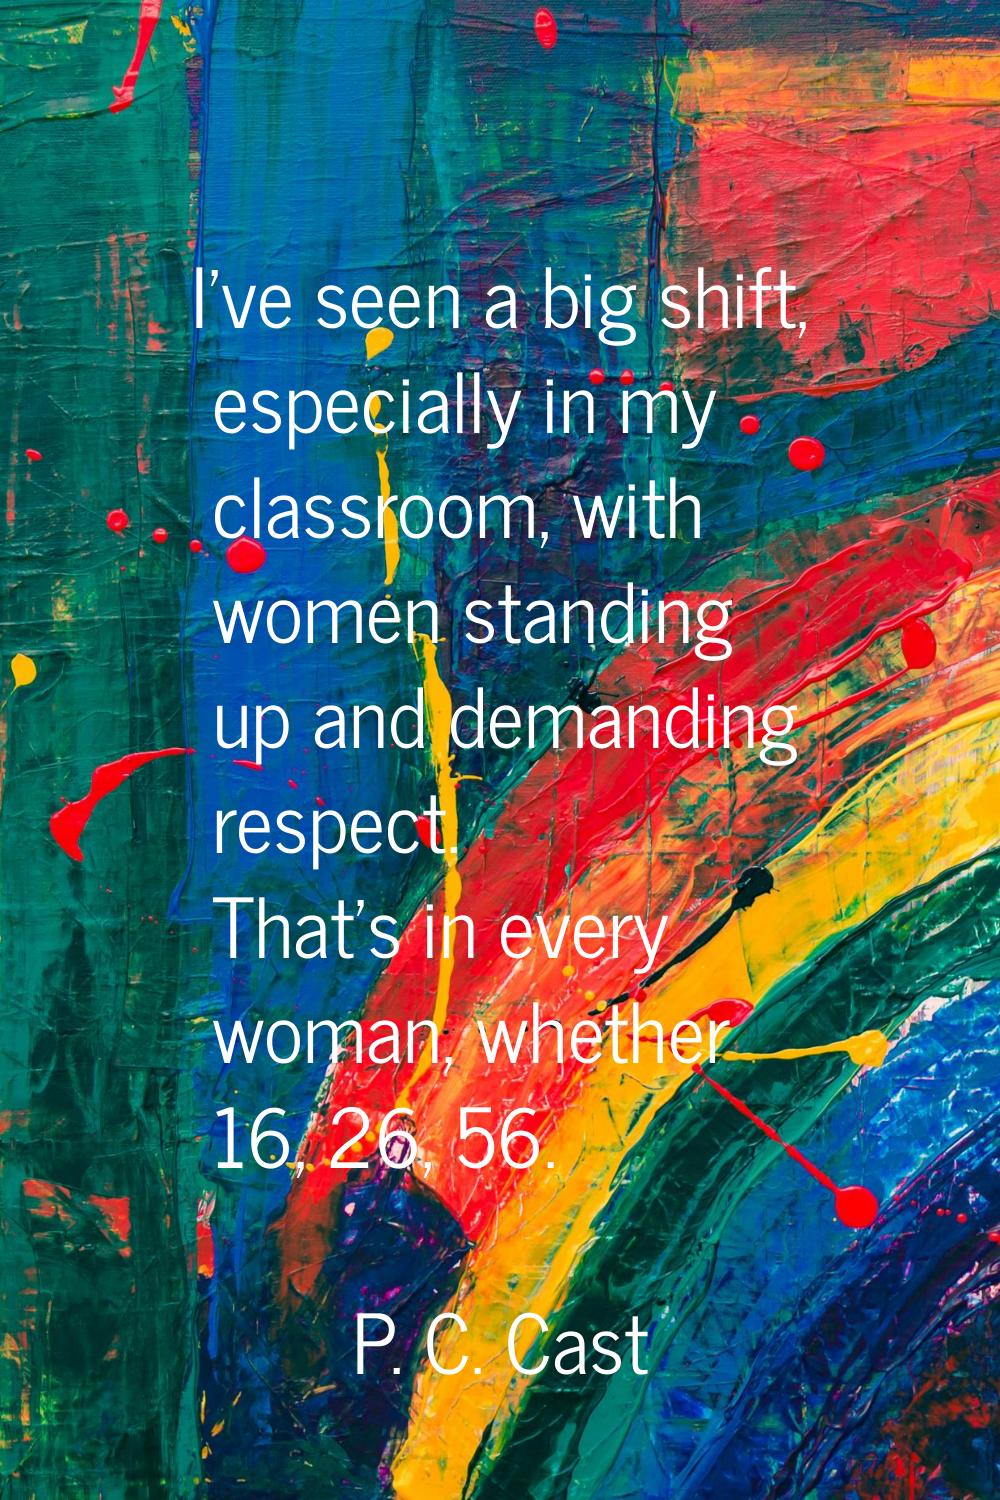 I've seen a big shift, especially in my classroom, with women standing up and demanding respect. Th